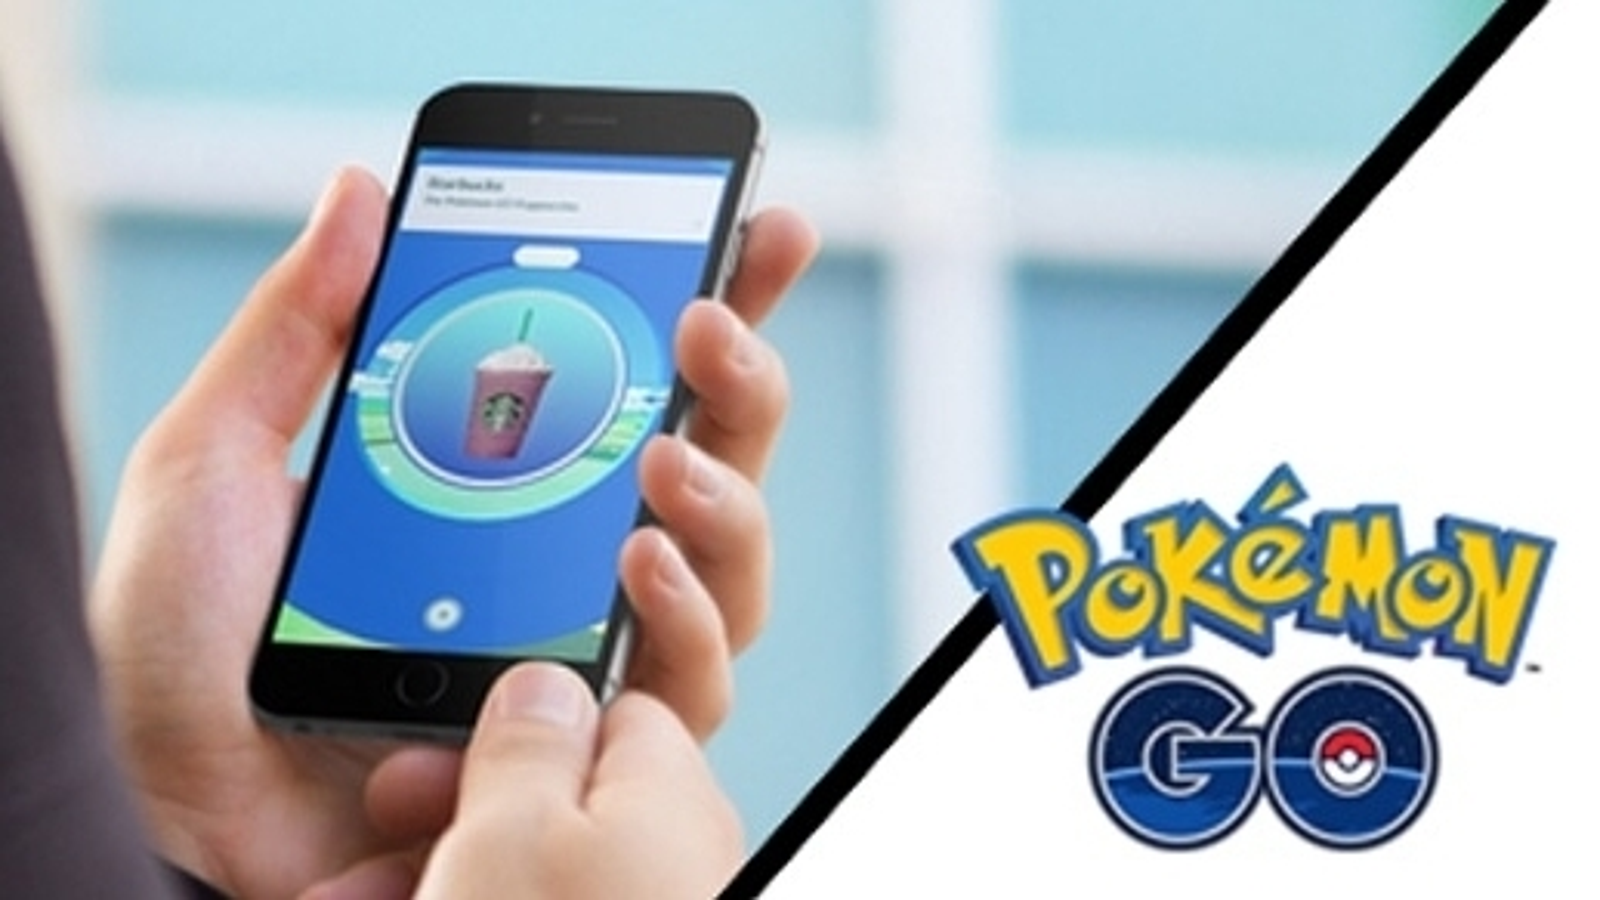 How to Download and Install Pokémon Go on Android Devices 2023? 